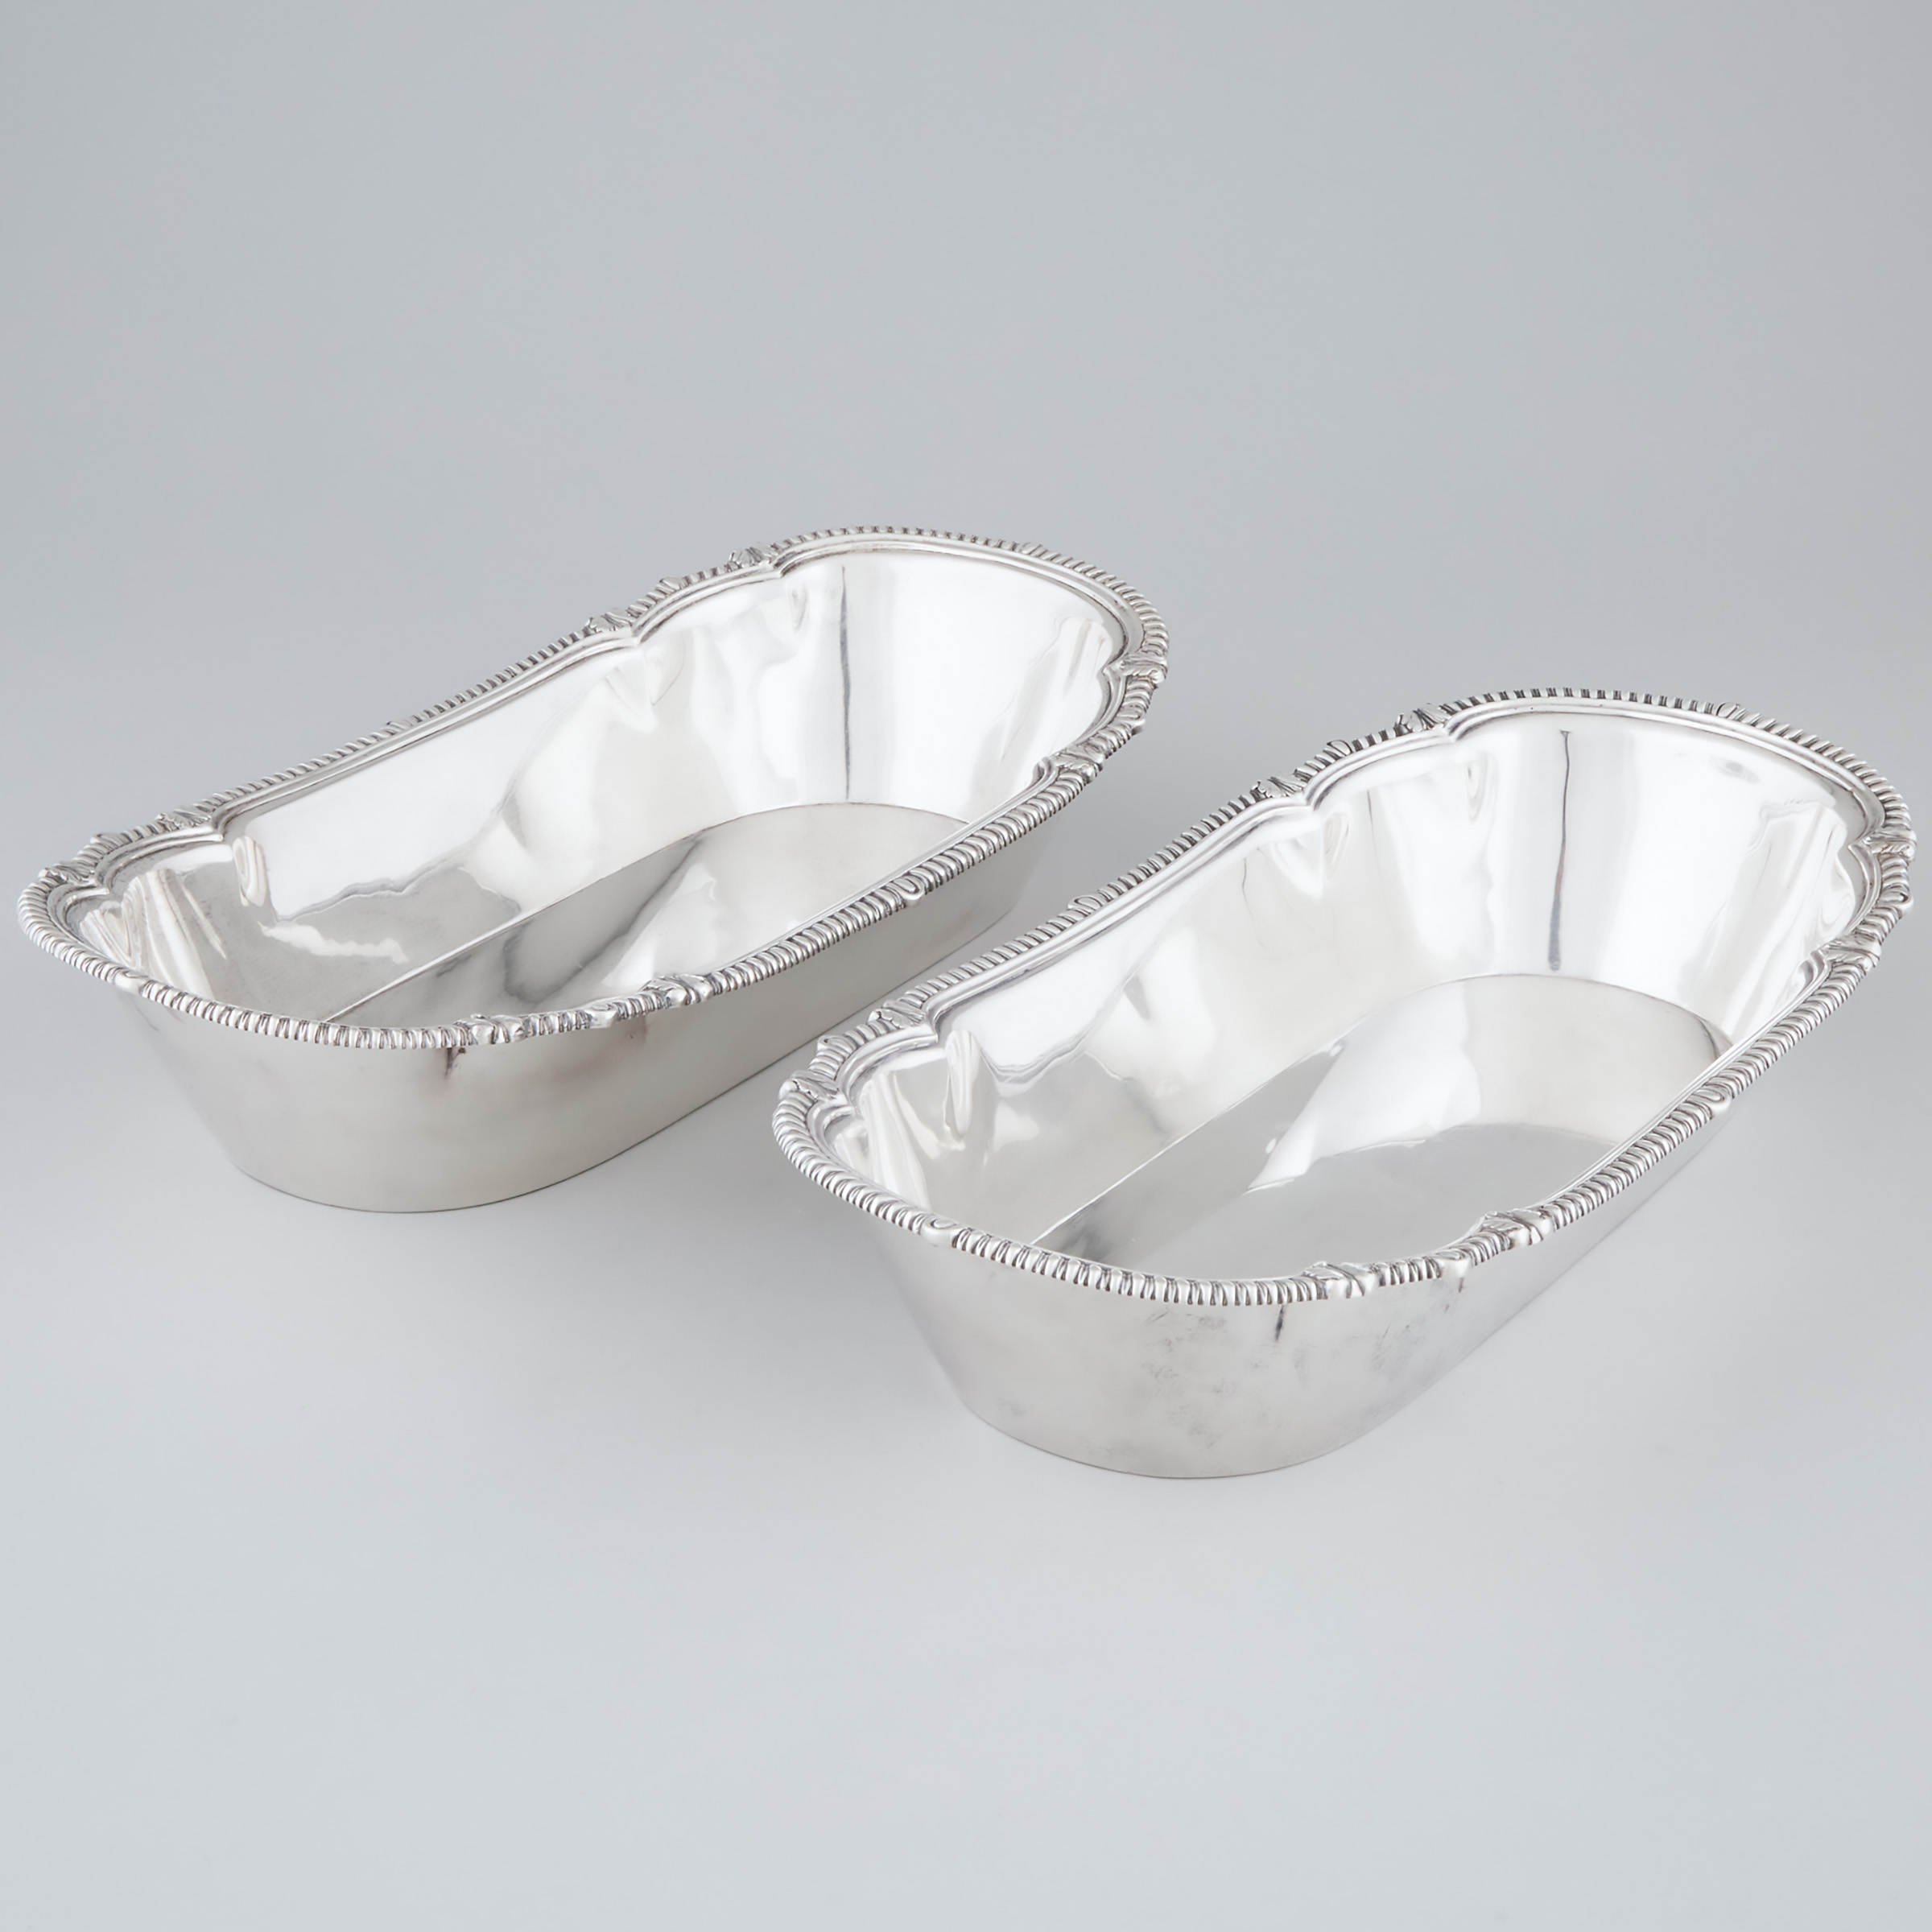 Pair of Victorian Silver Shaped Oblong Bread Dishes or Knife Trays, Robert Garrard, London, 1852